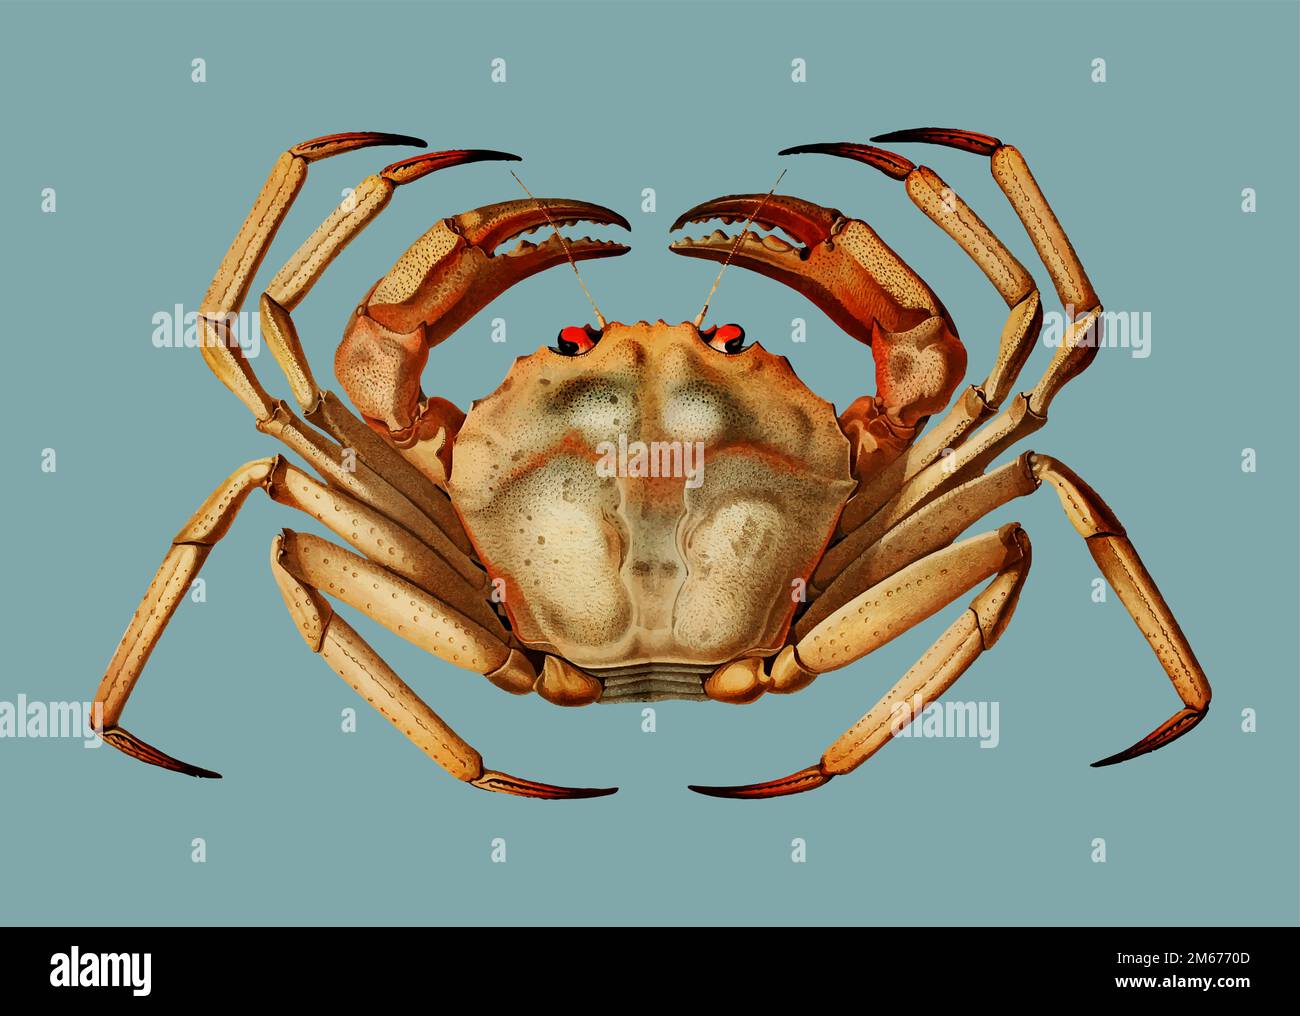 Chaceon, the Atlantic deep sea red crab illustration Stock Vector